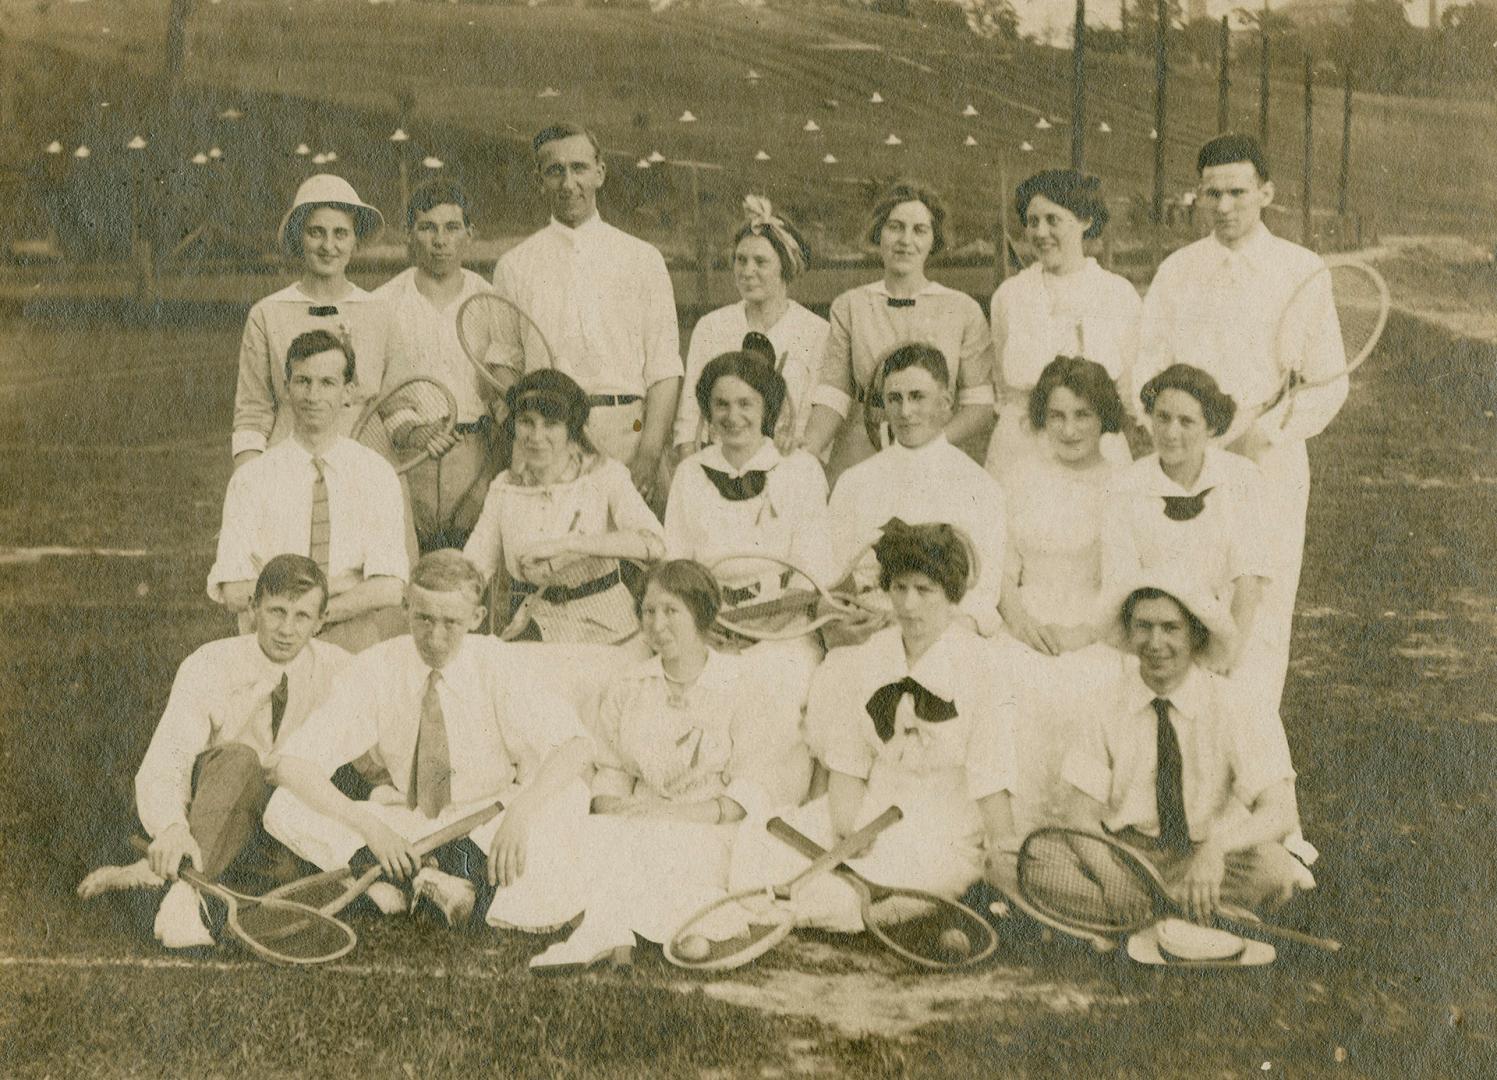 Tennis team at tennis courts, Riverdale Park, Broadview Avenue, west side, opposite Tennis Crescent, Toronto, Ontario.